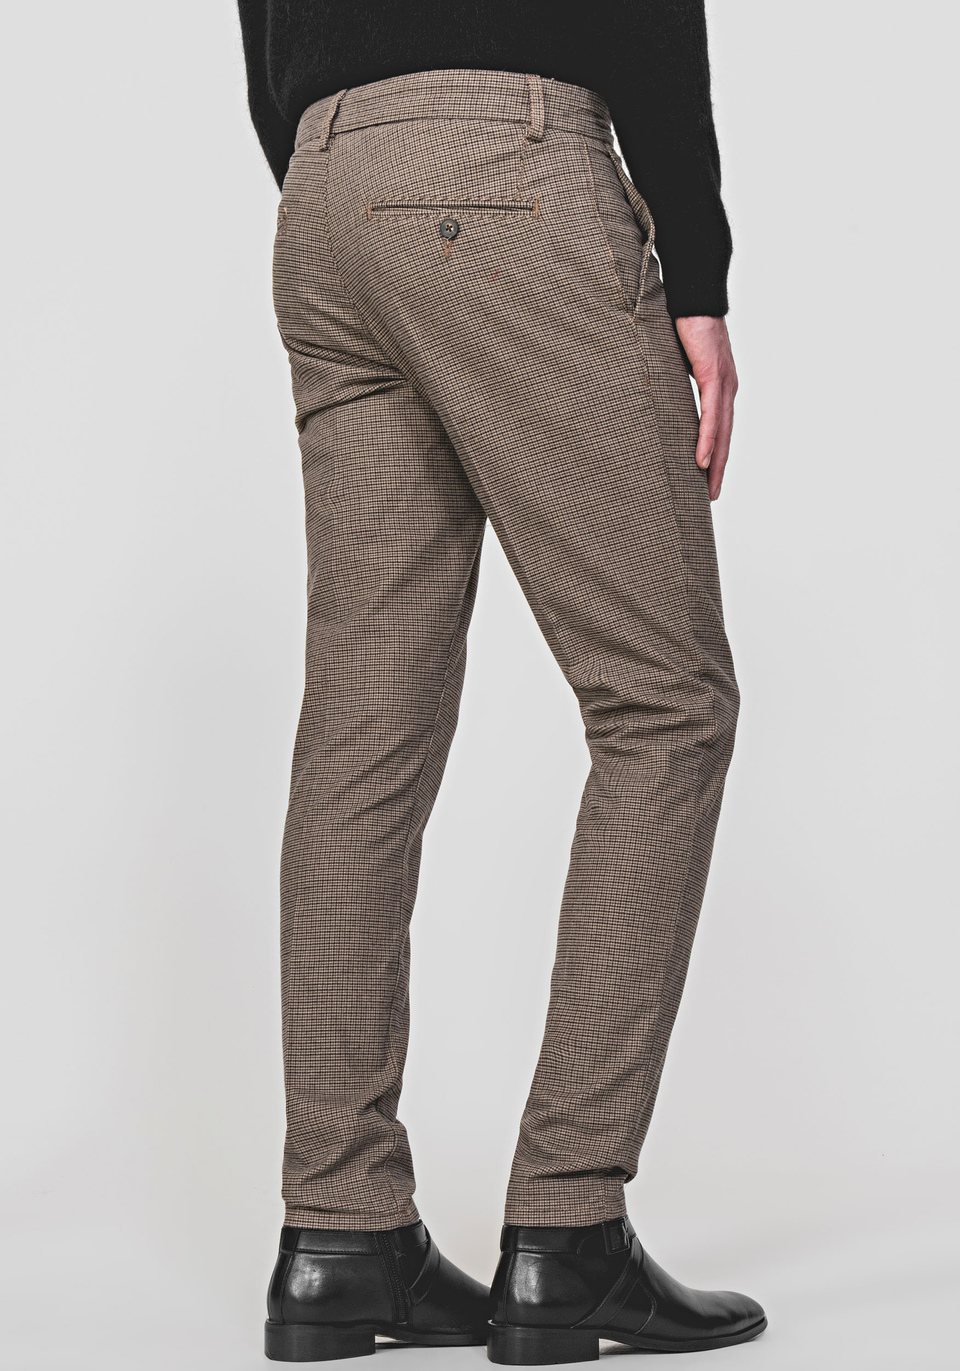 SKINNY-FIT "BRYAN" TROUSERS IN A STRETCHY COTTON BLEND WITH A CHECKED MICRO PATTERN - Antony Morato Online Shop